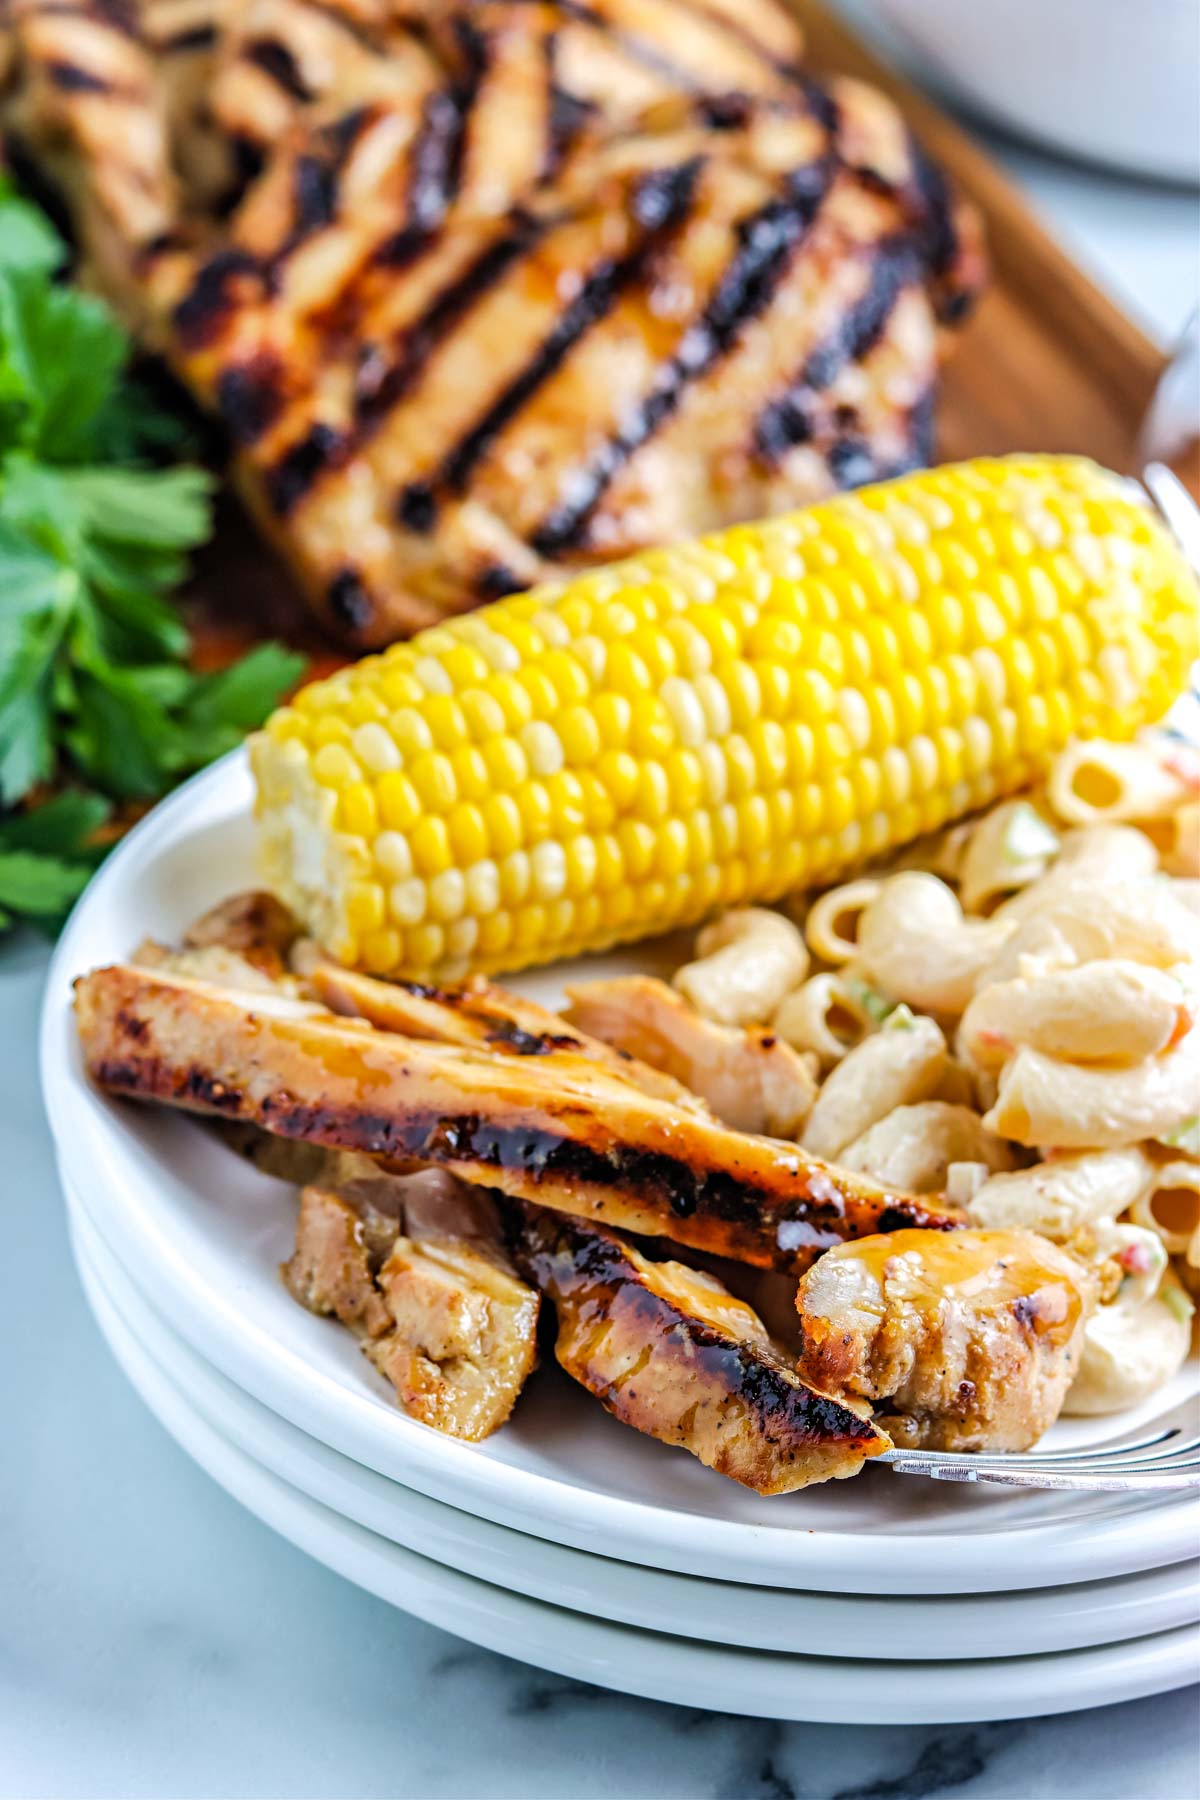 The finished grilled chicken thigh cut up and on a plate along with corn and macaroni salad.